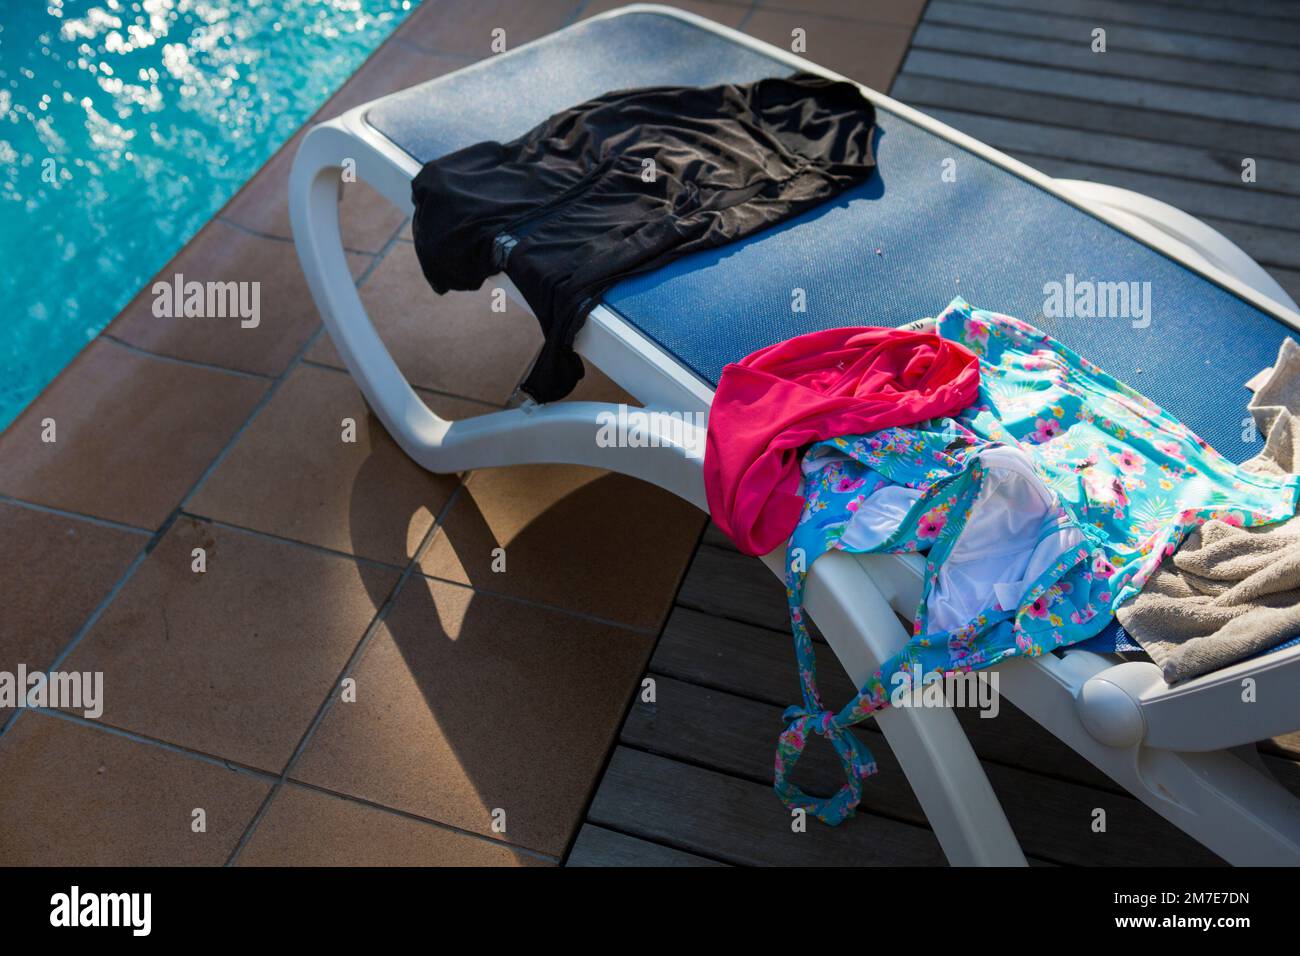 A pool side lounger with swimming costume, towels and rtrunks drying in the sun. Stock Photo